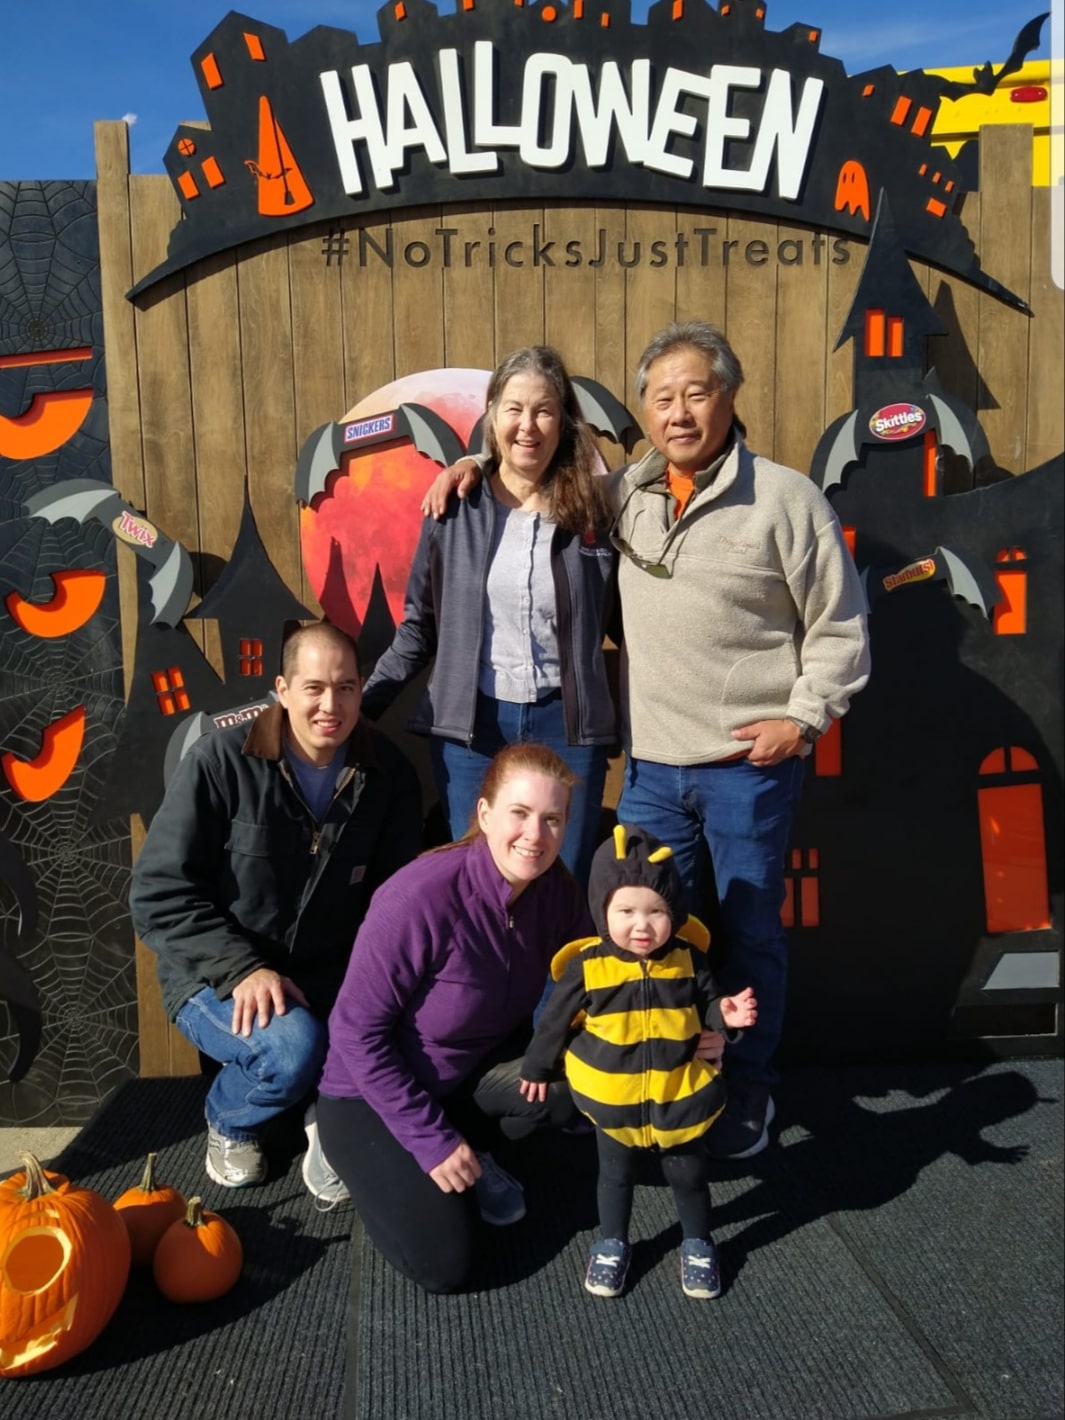 Donna and Barry with their growing family. The sign behind them reads, “Halloween: NoTricksJustTreats”